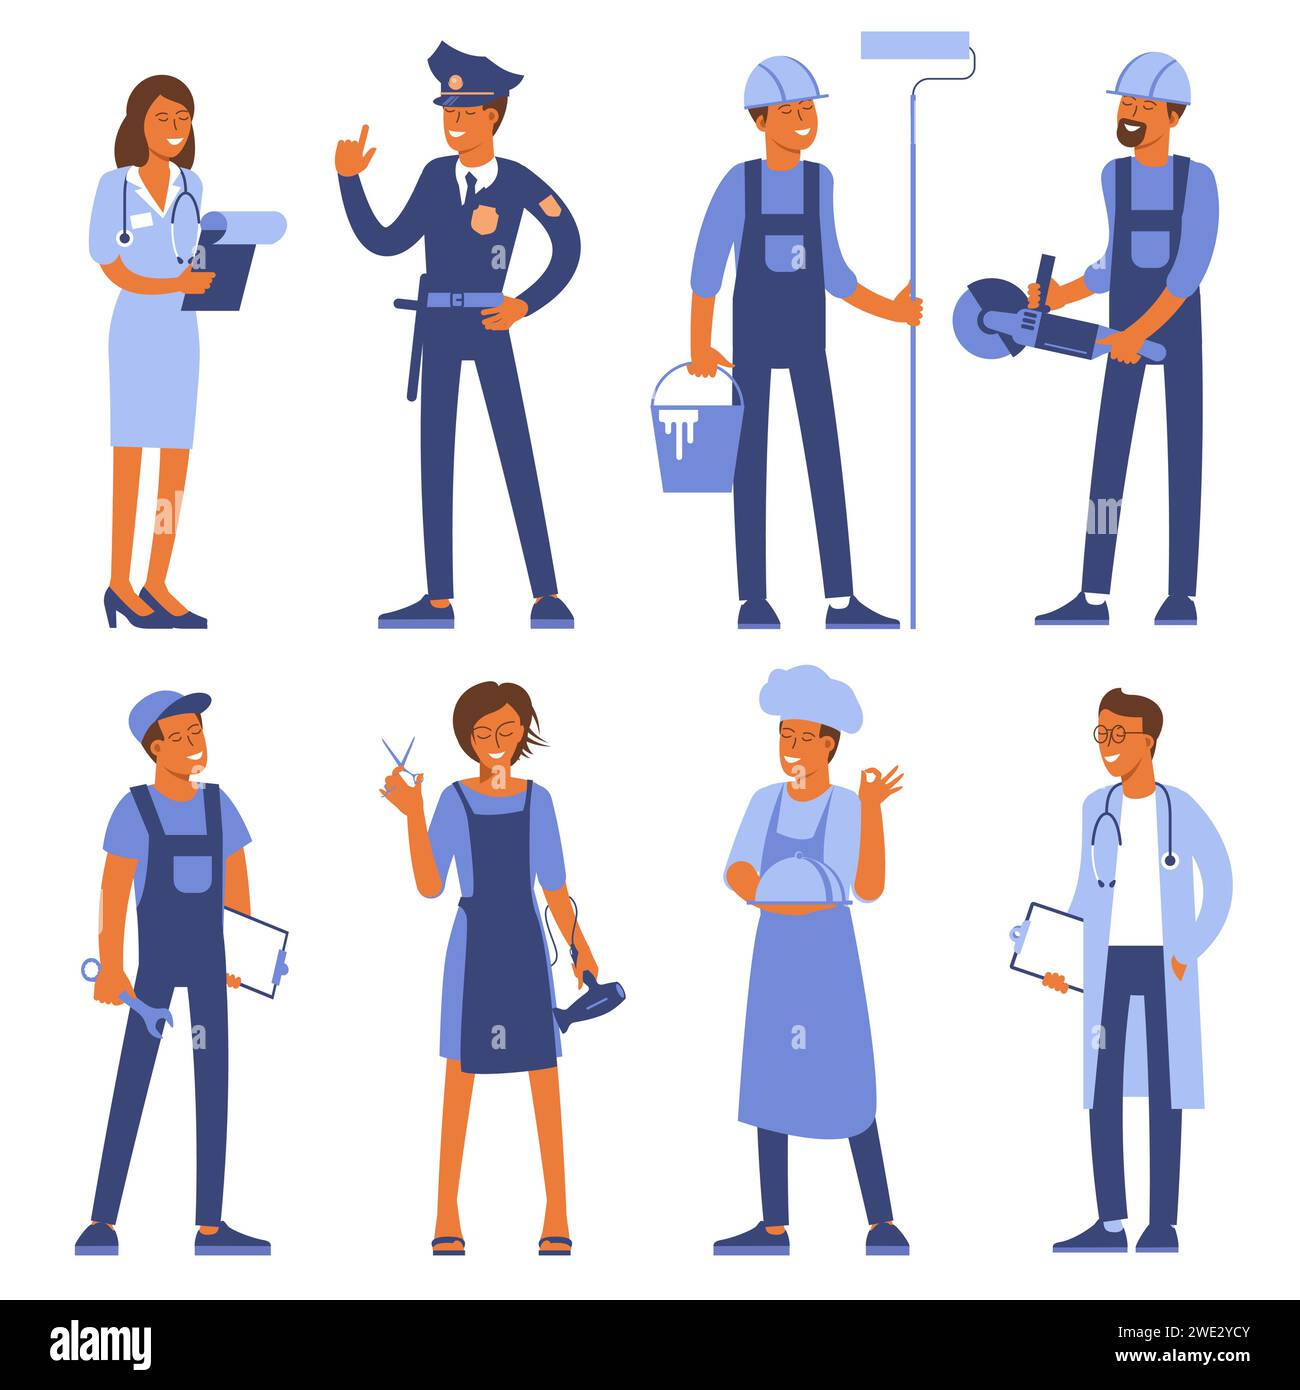 People who are working. Stock Vector